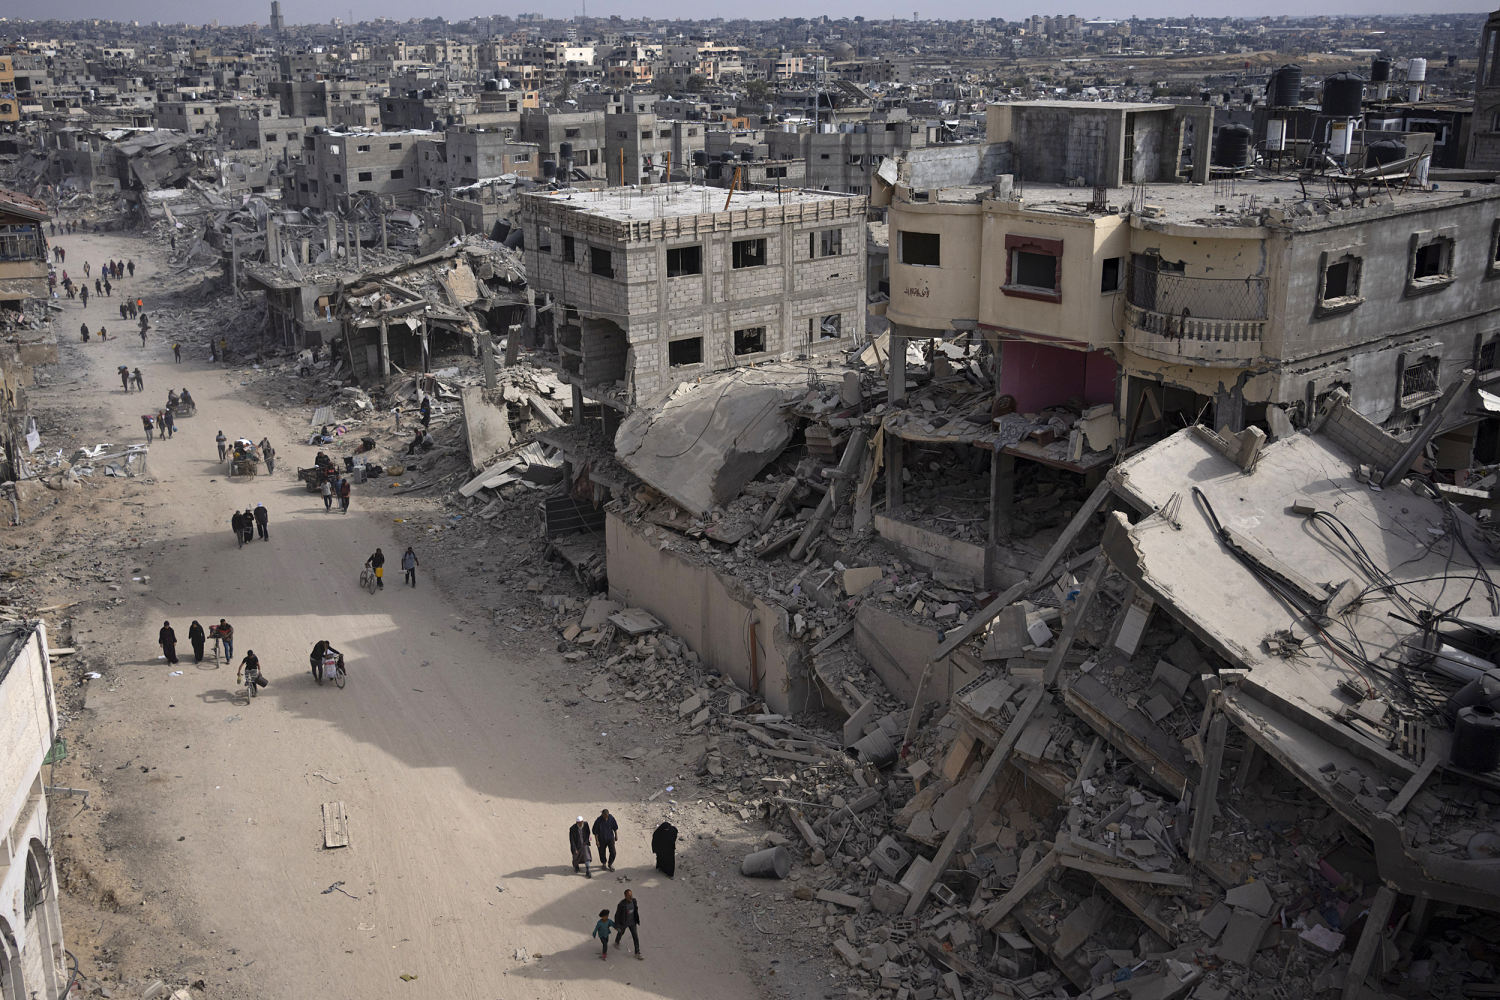 A Gaza teen spent last Eid surrounded by family. Now she’s collecting their bones.